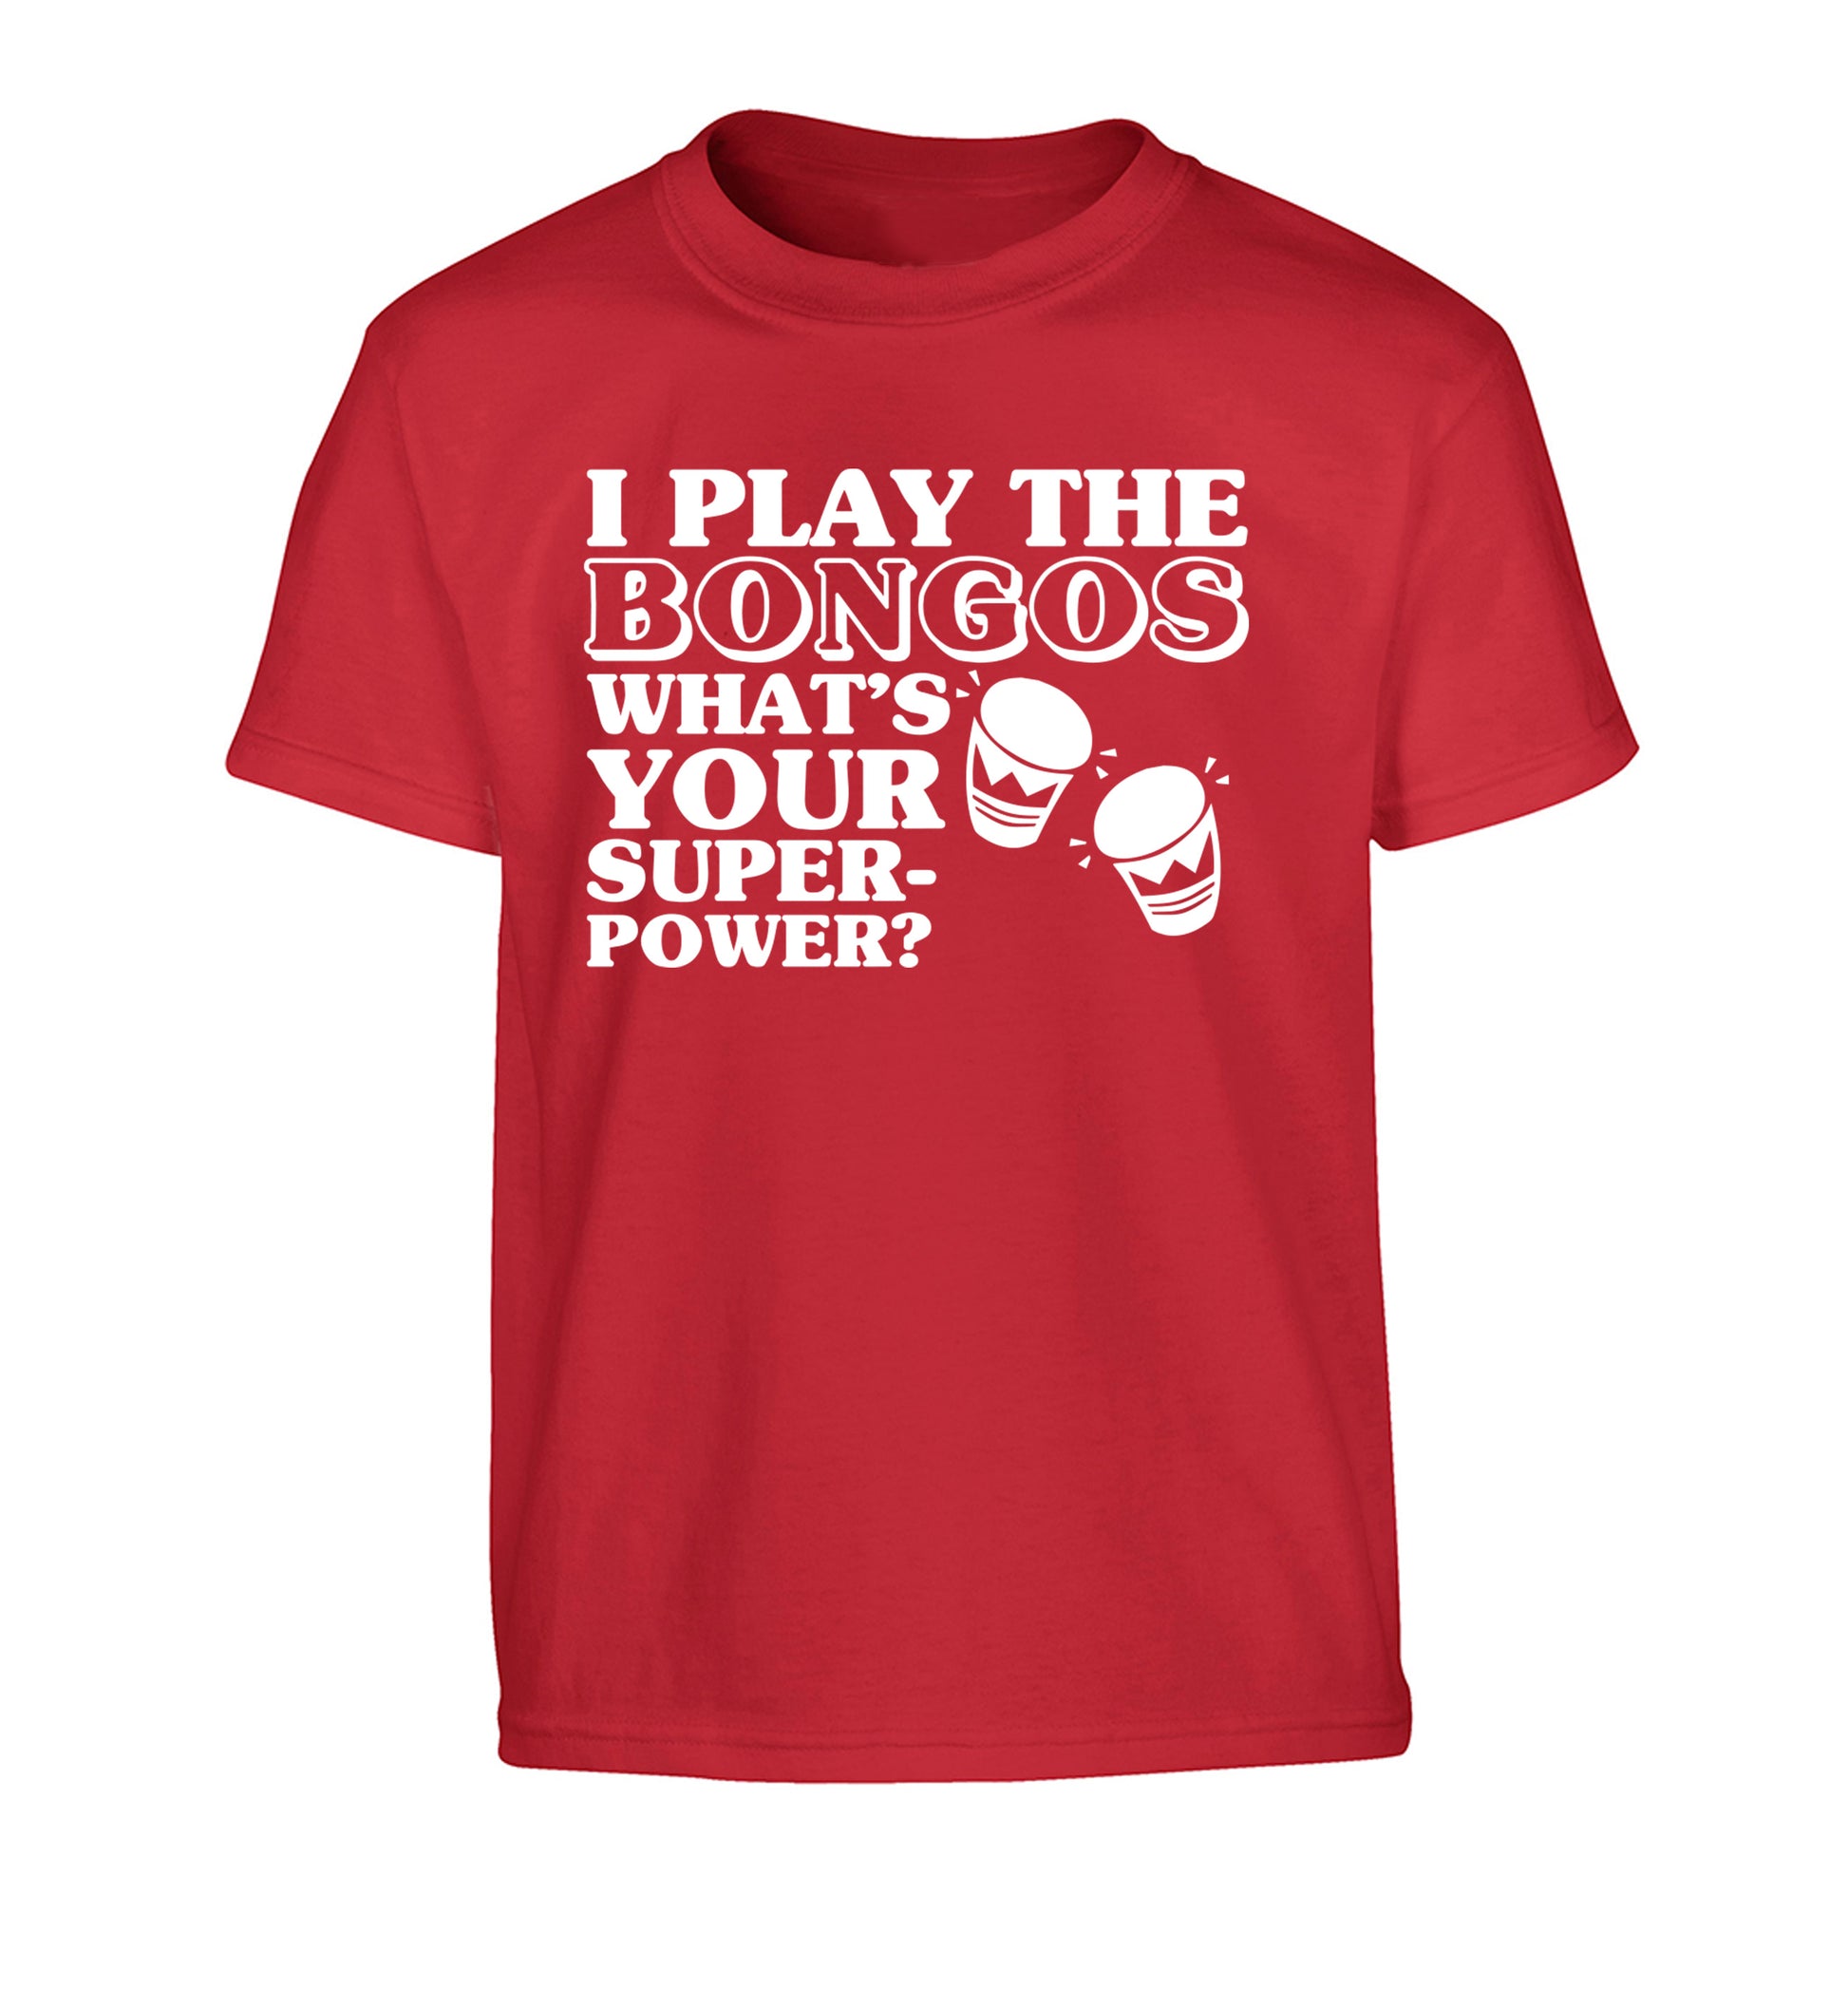 I play the bongos what's your superpower? Children's red Tshirt 12-14 Years